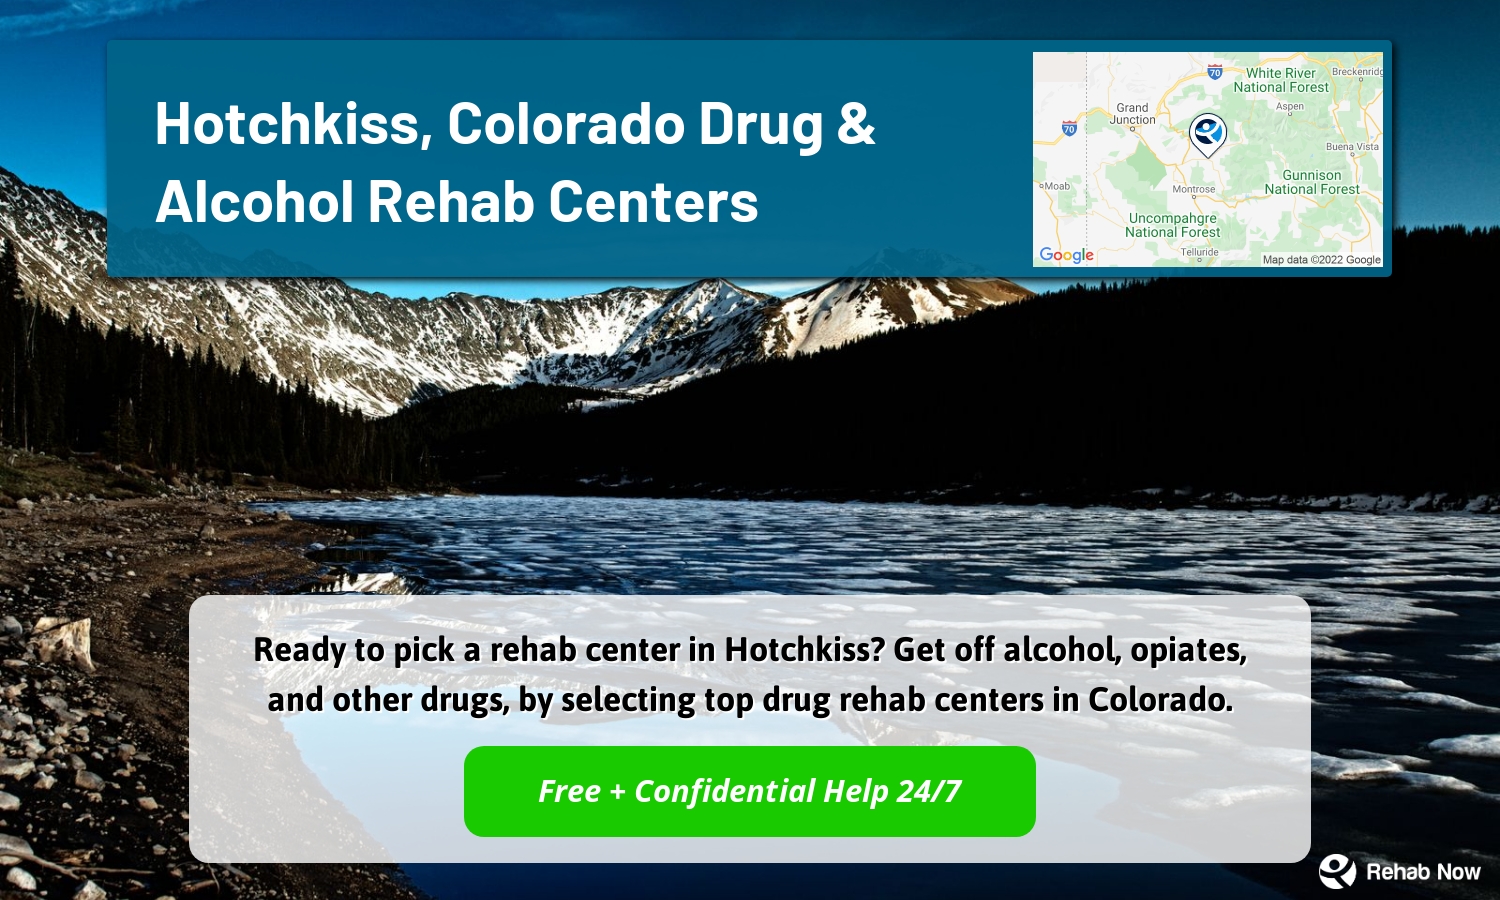 Ready to pick a rehab center in Hotchkiss? Get off alcohol, opiates, and other drugs, by selecting top drug rehab centers in Colorado.